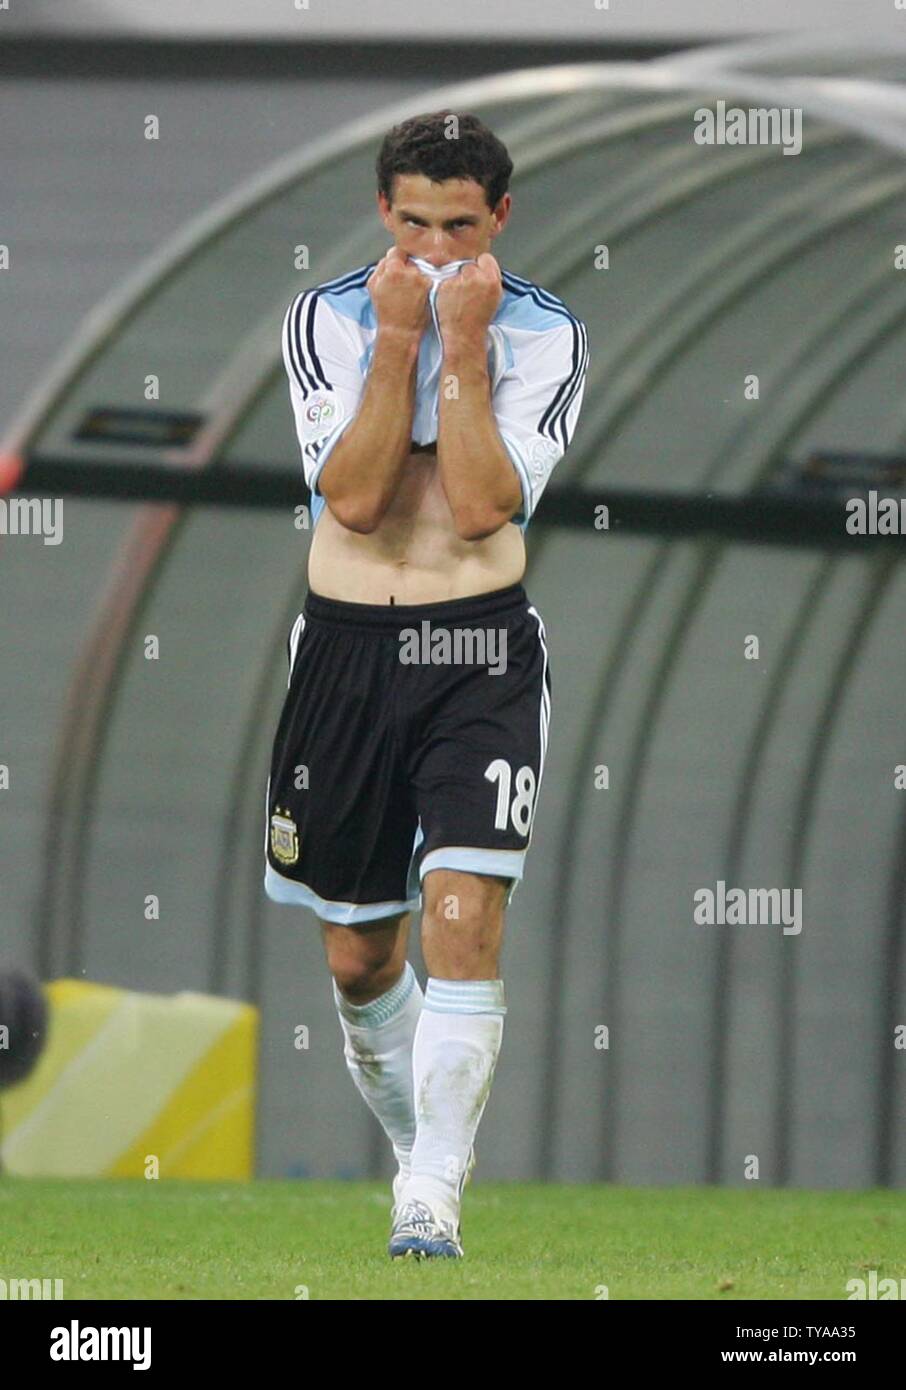 Argentina's Pablo Aimar (16)  during the last 16 knock-out stage of the FIFA World Cup Germany 2006 at the Zentralstadion in Leipzig, Germany, on June 24, 2006. Argentina needed extra-time and a wonder strike from Maxi Rodriguez to give them a 2-1 victory over Mexico and a place in the quarter-finals.  (UPI Photo/Christian Brunskill) Stock Photo